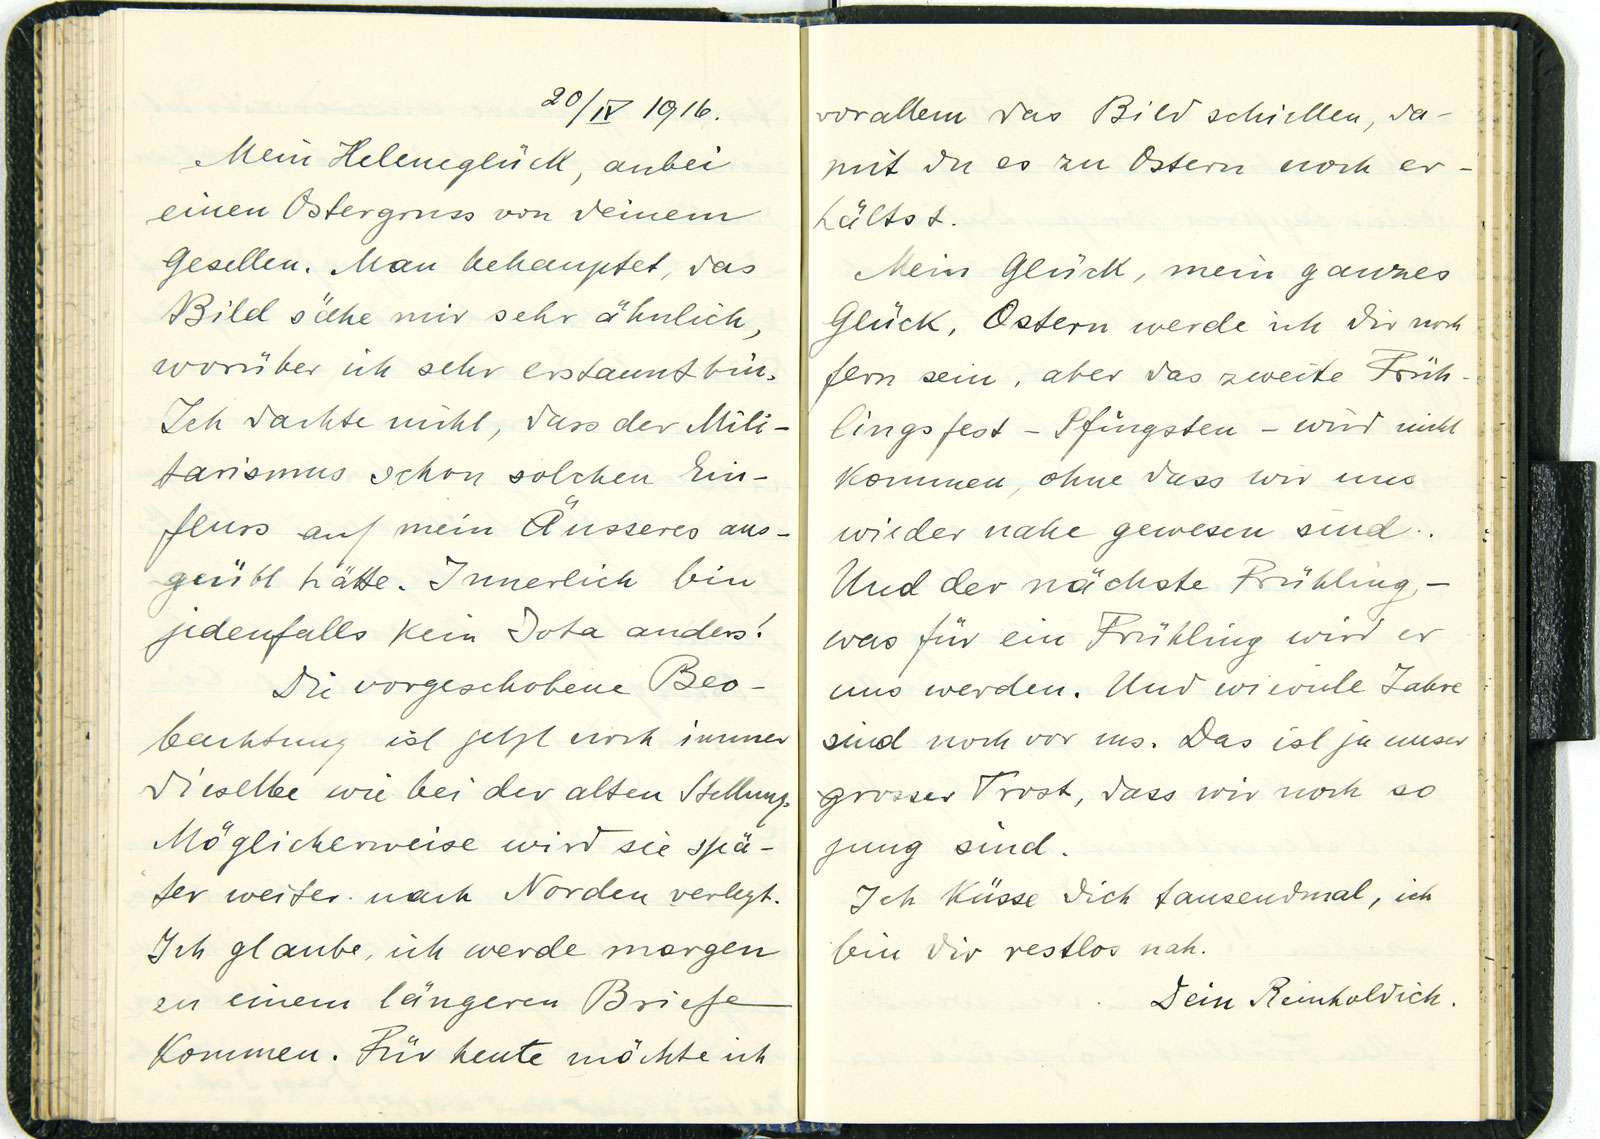 Reinhold's Easter message to his wife, 1916